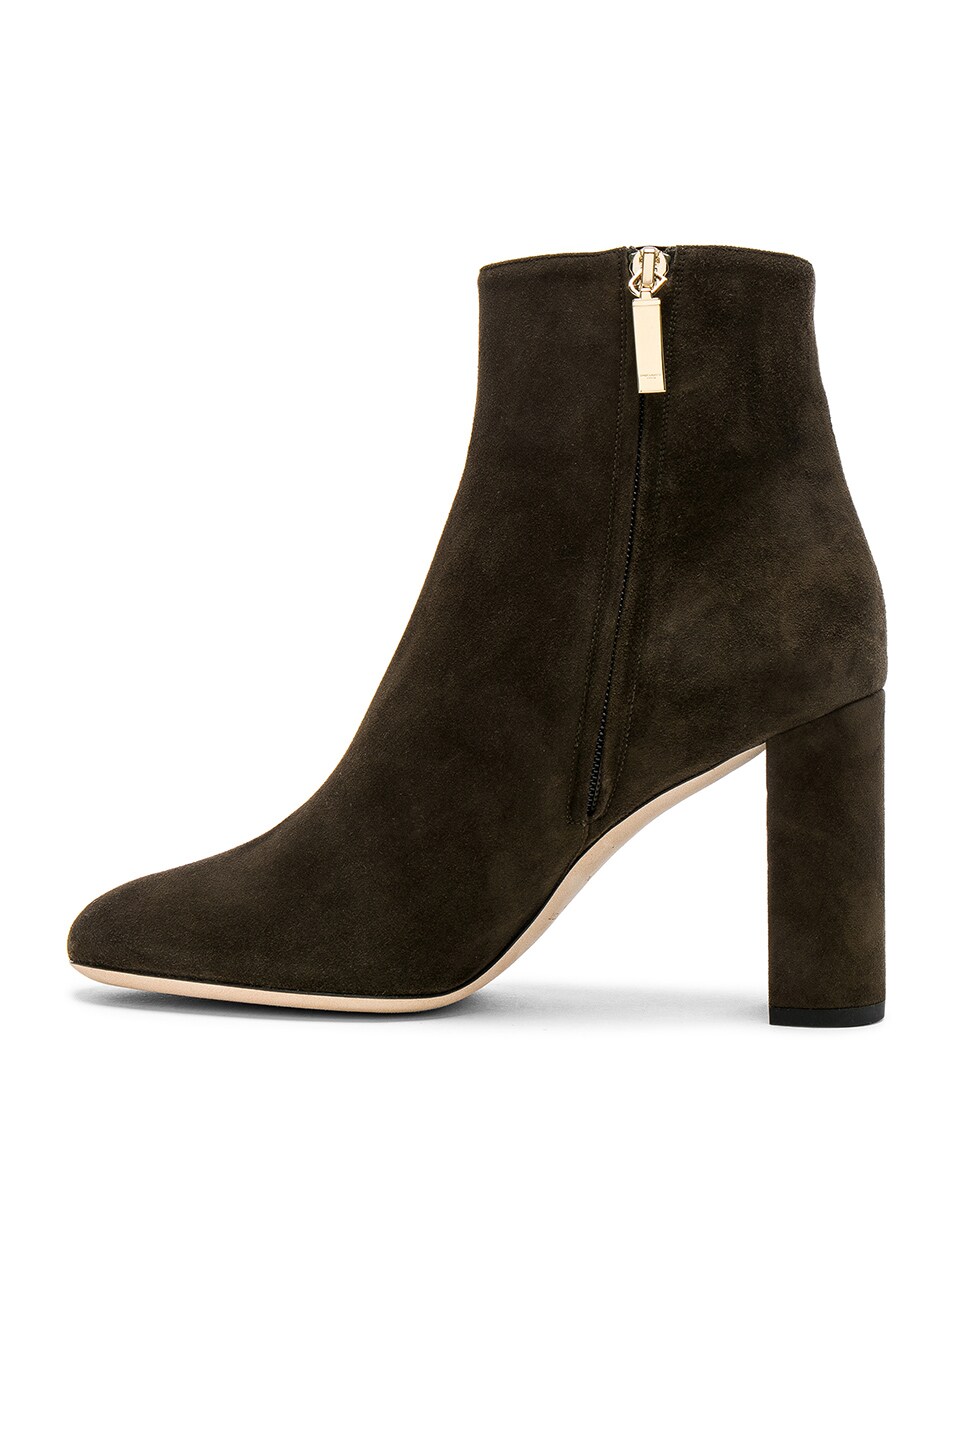 SAINT LAURENT Suede Loulou Pin Boots in Army Green | ModeSens